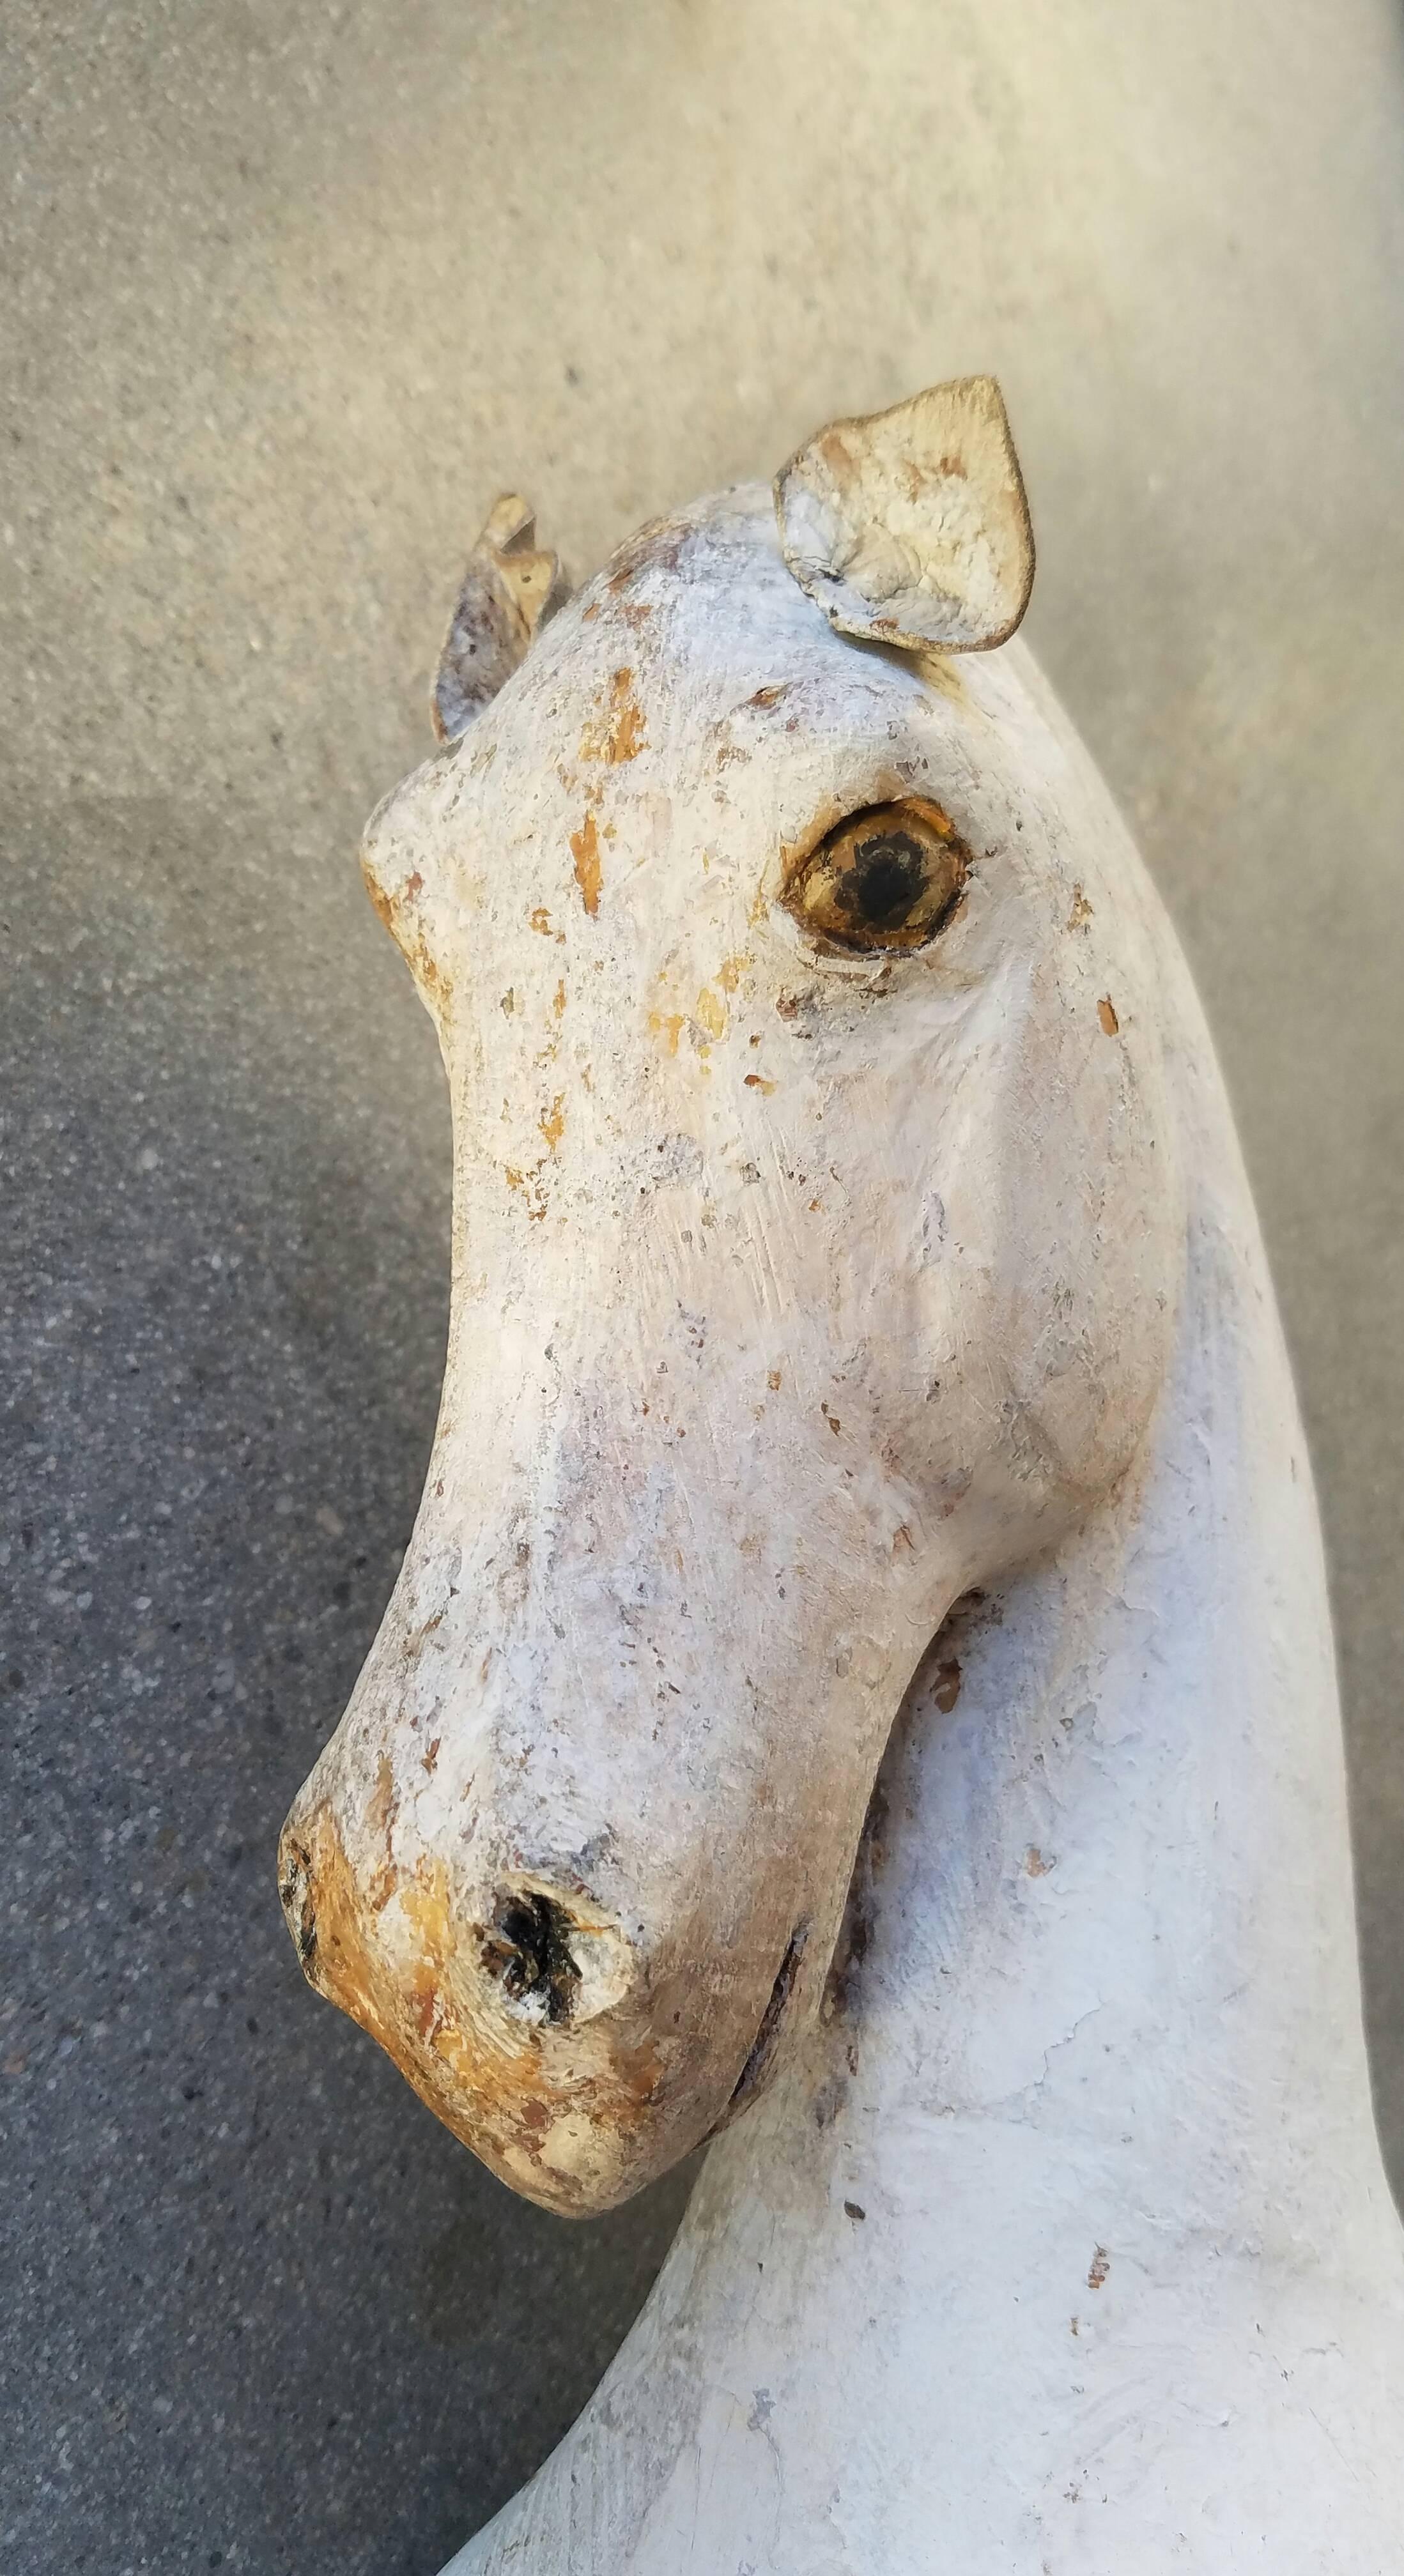 This antique wooden child's horse has horse hair tail, painted mane, eyes, hooves and coat with beautiful expression and size.